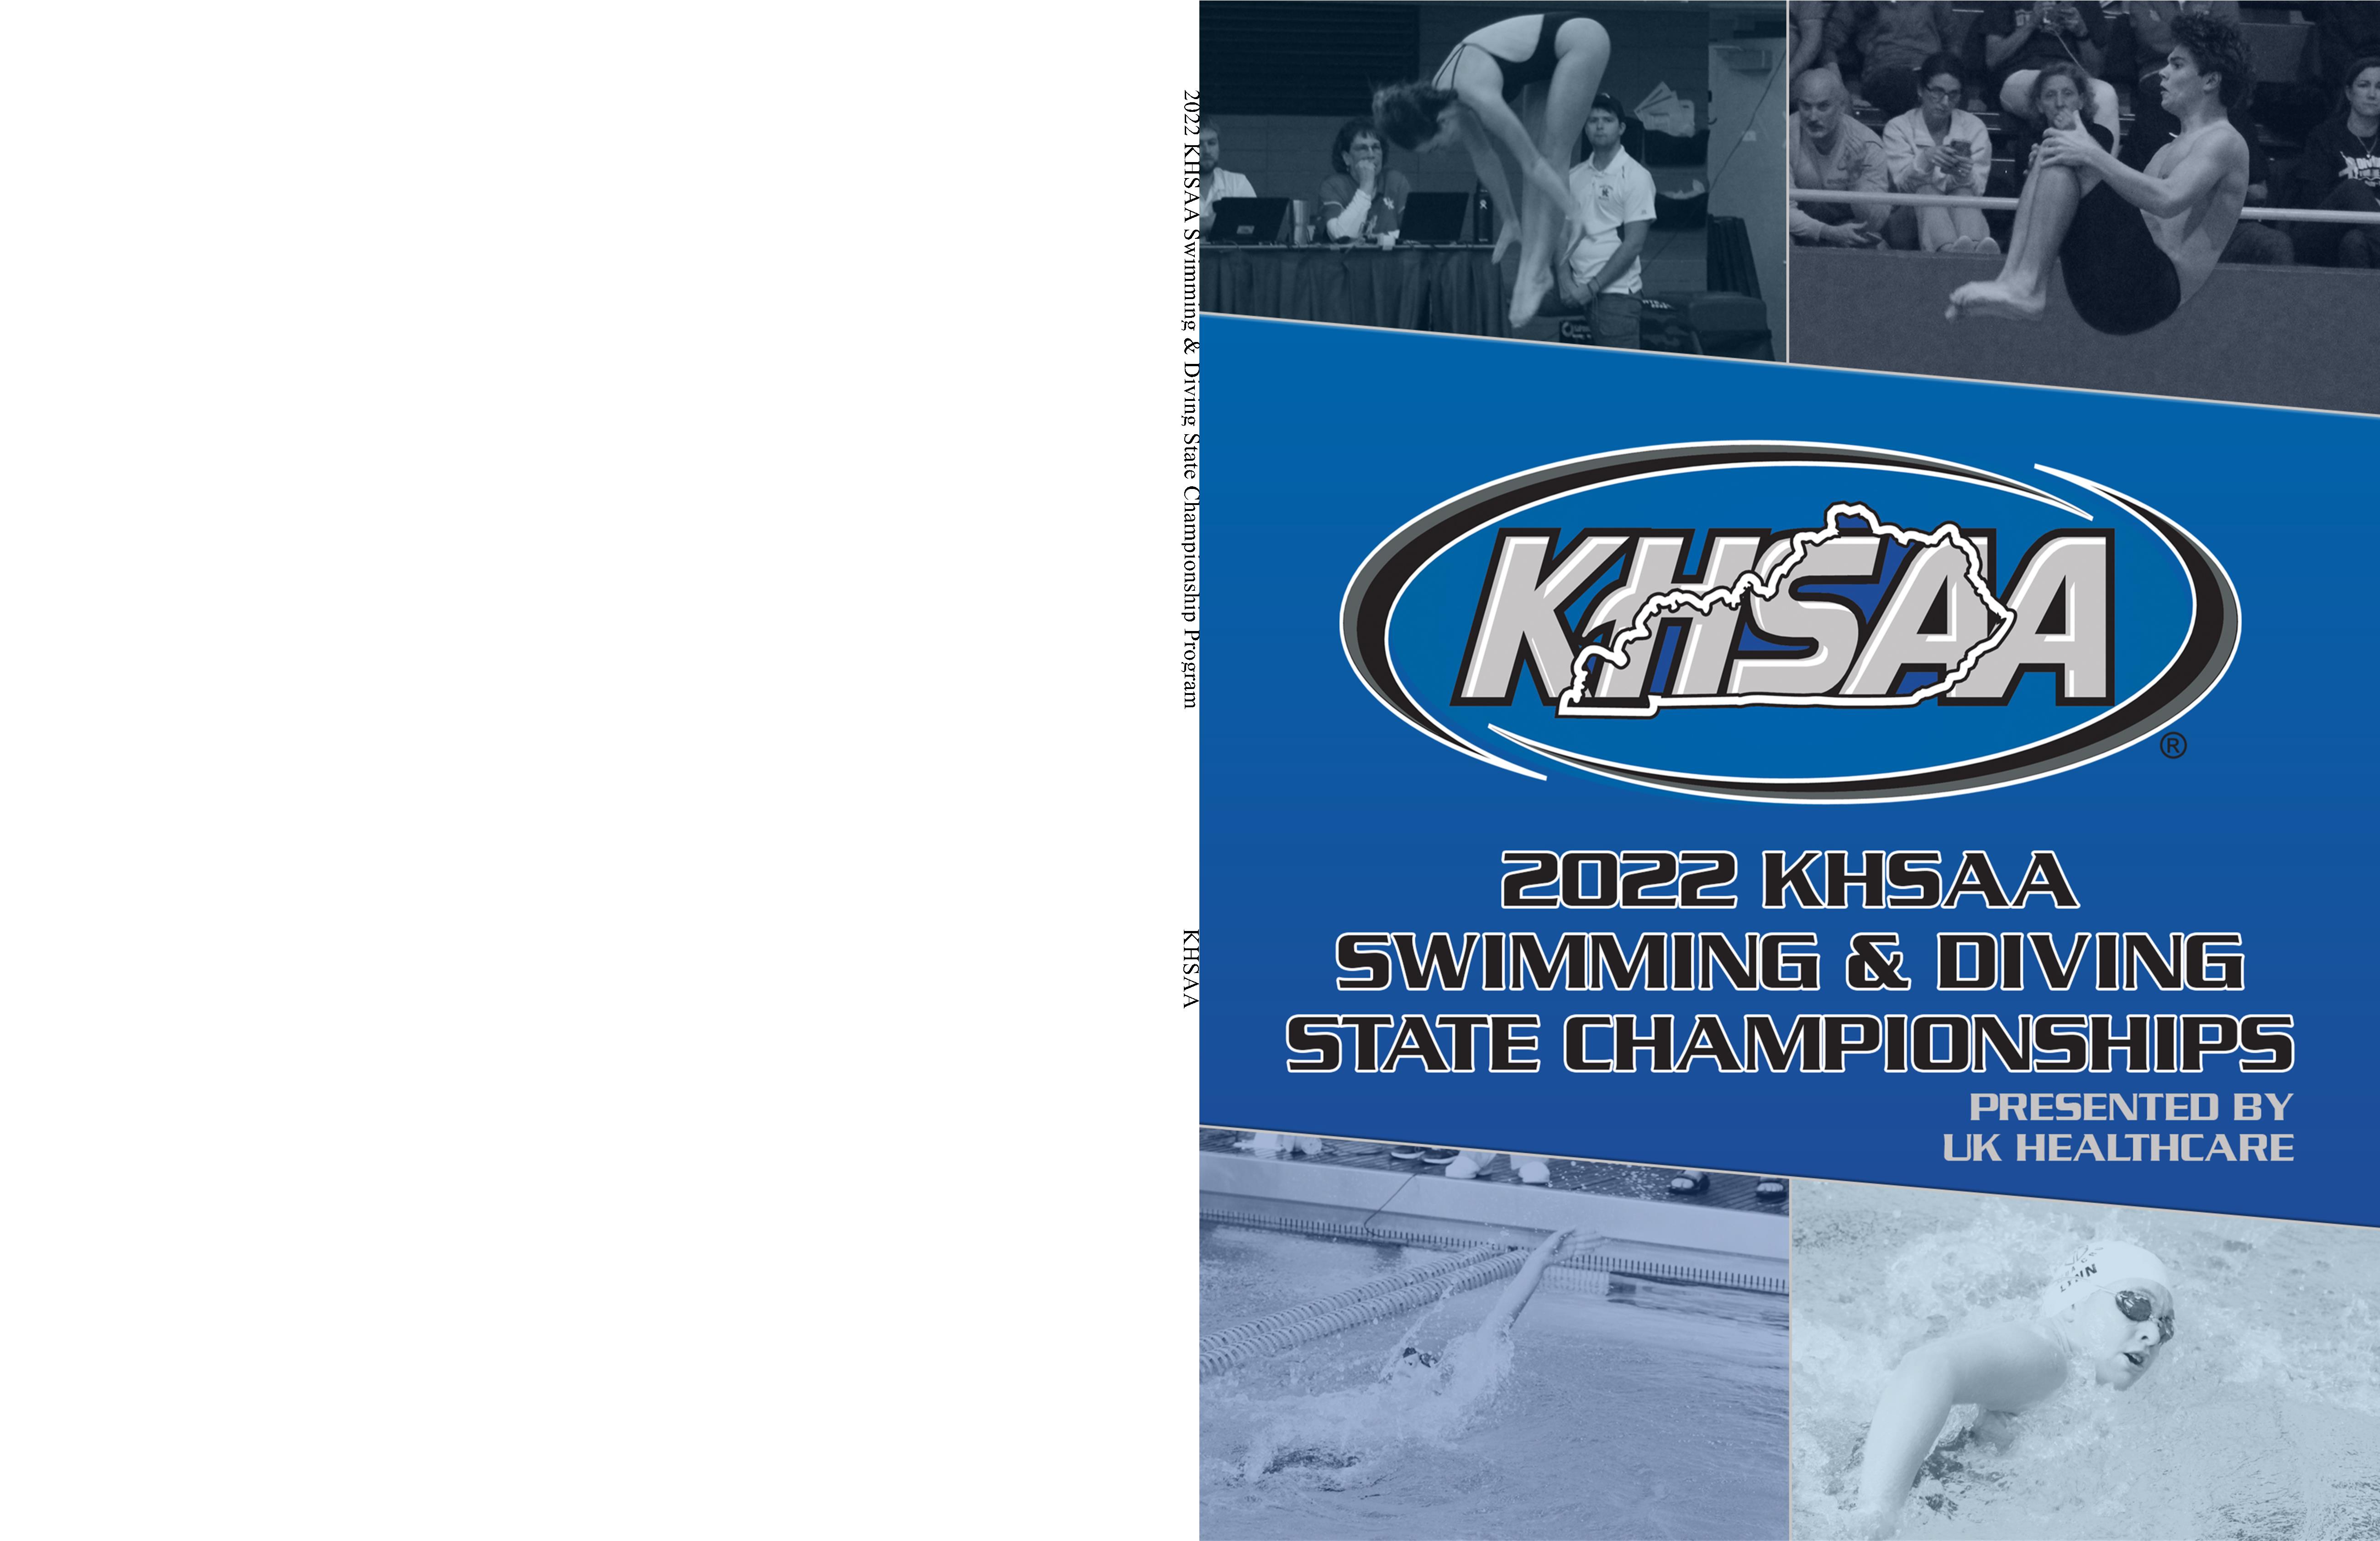 2022 KHSAA Swimming & Diving State Championship Program (B&W) cover image